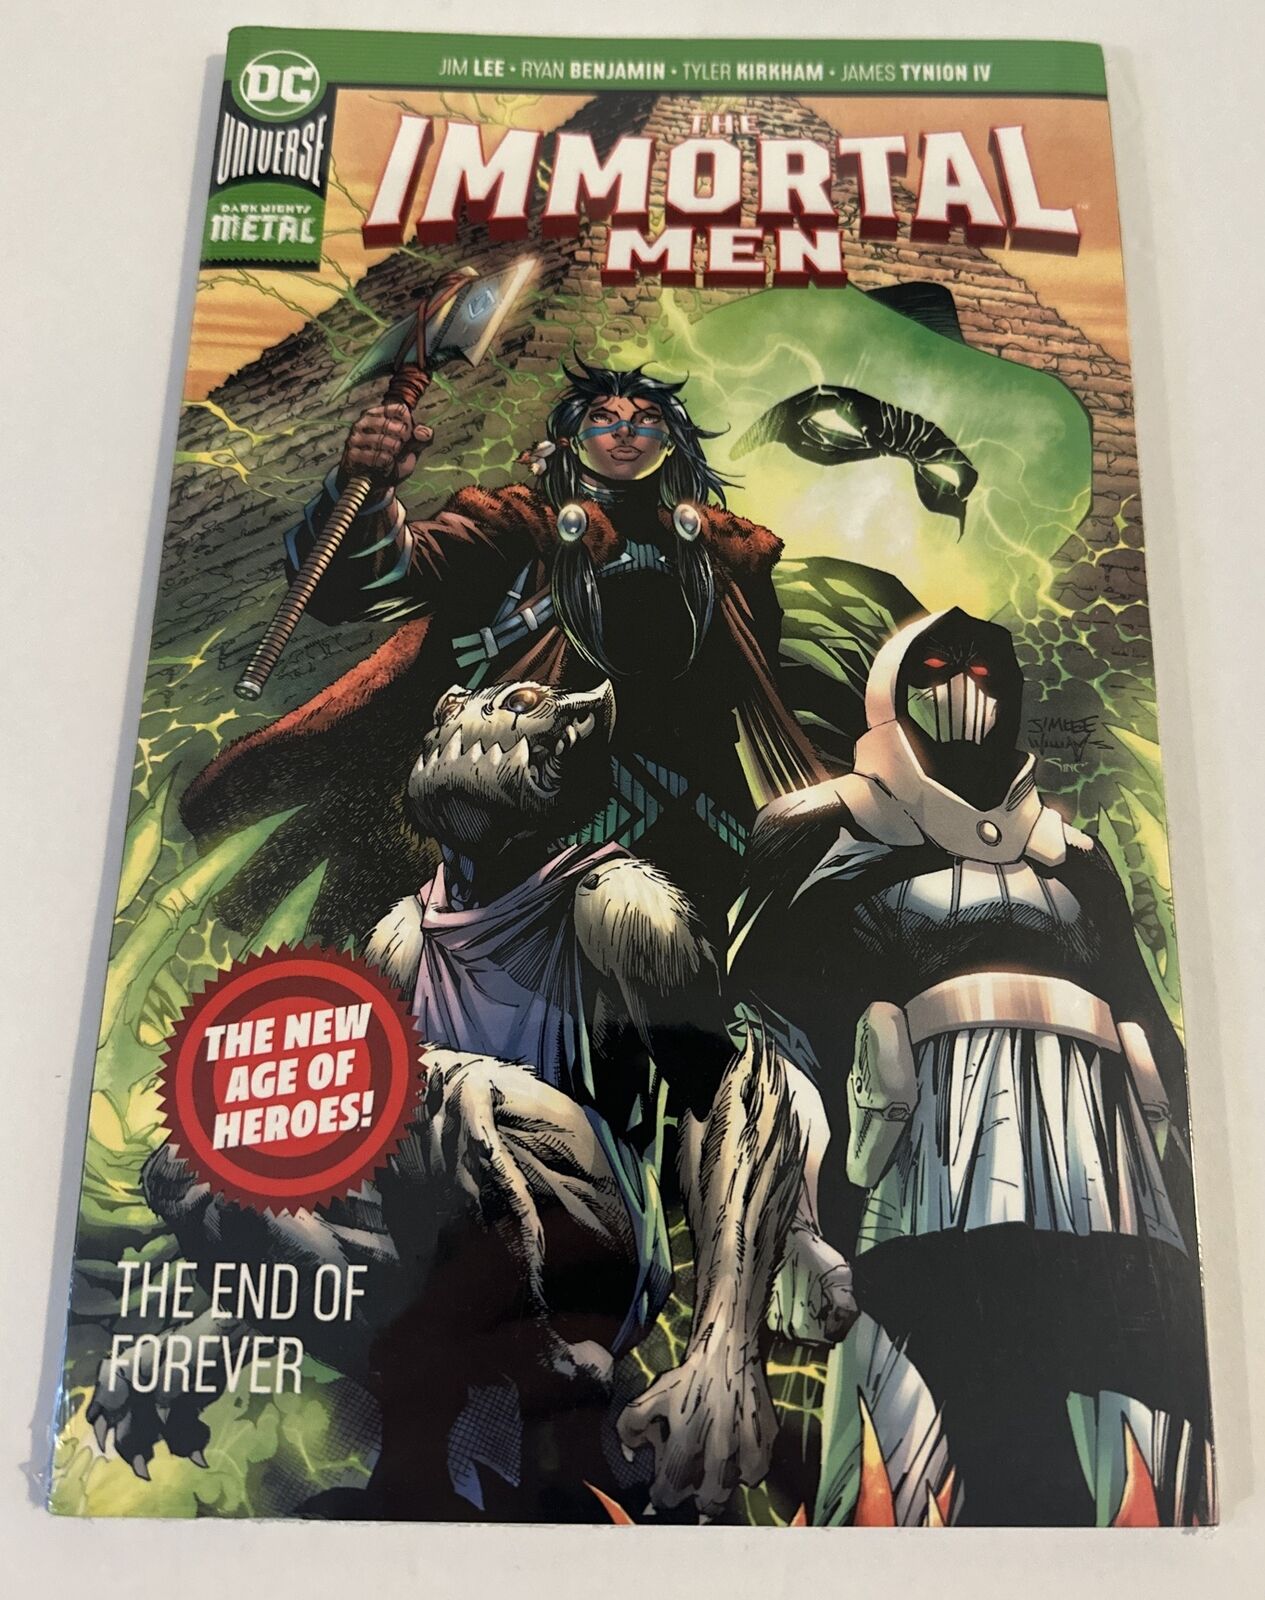 The Immortal Men: The End of Forever (DC Comics, 2018 January 2019)